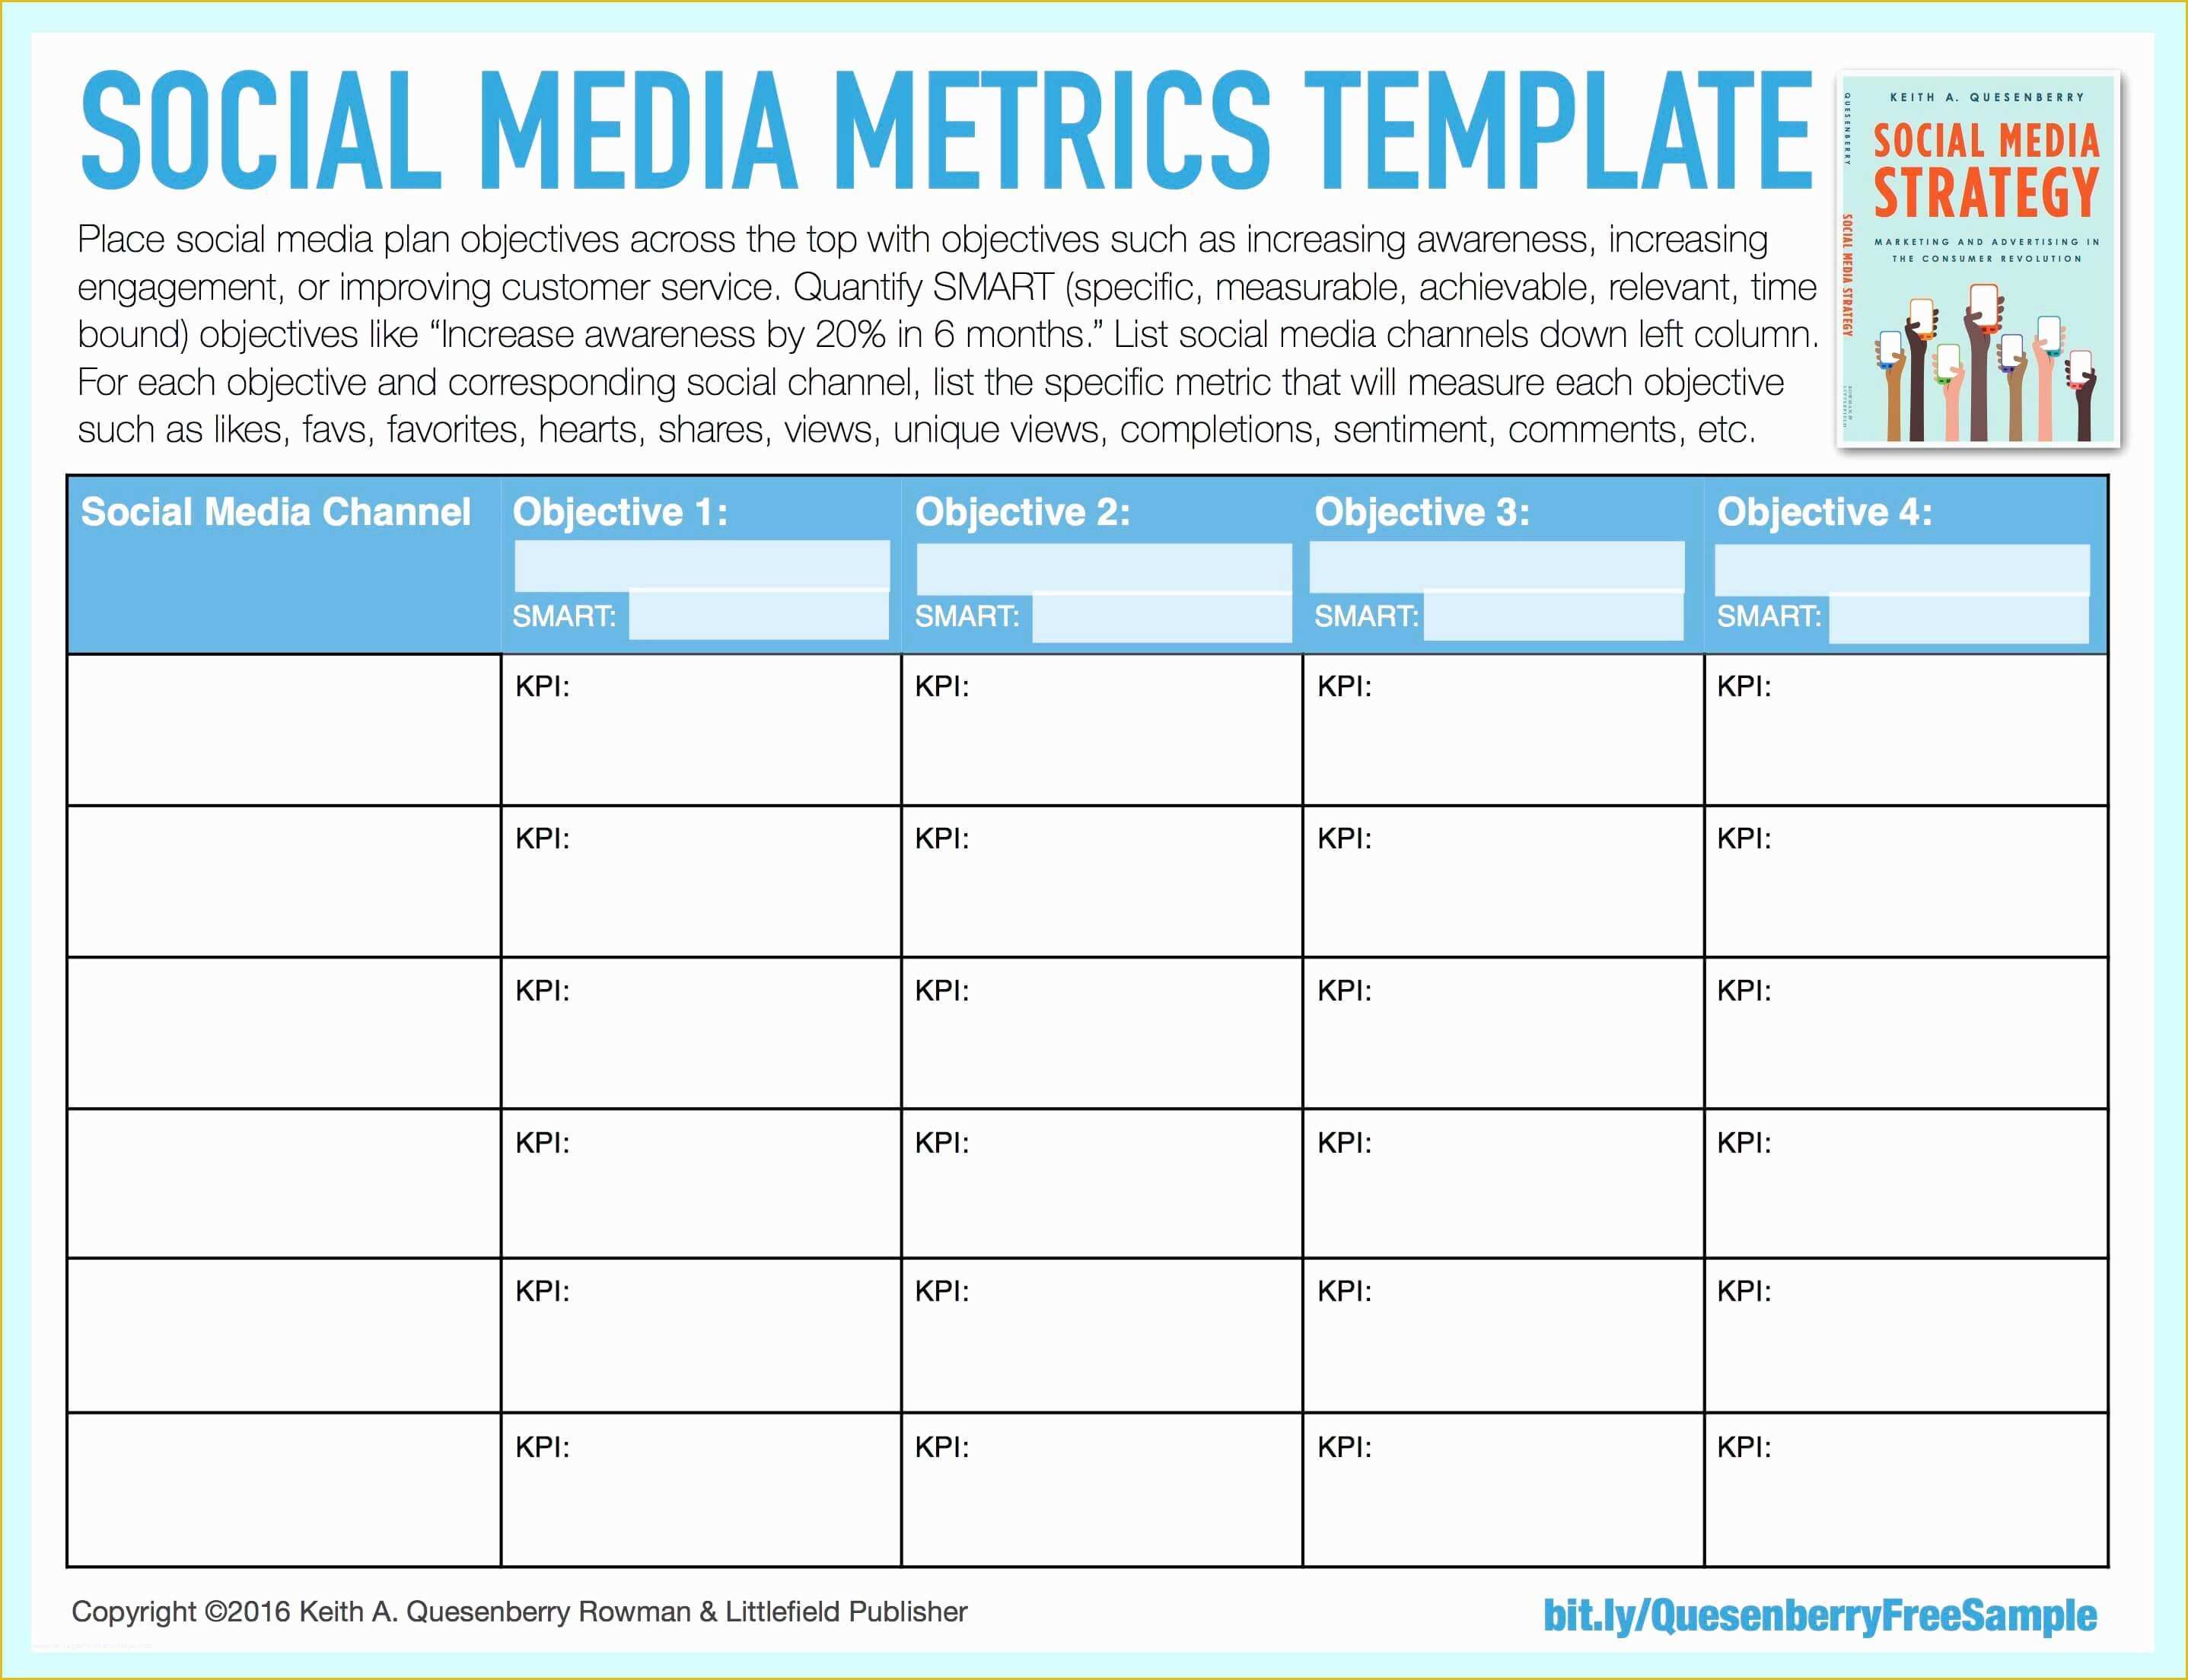 Free Audit Program Templates Of social Media Templates Keith A Quesenberry